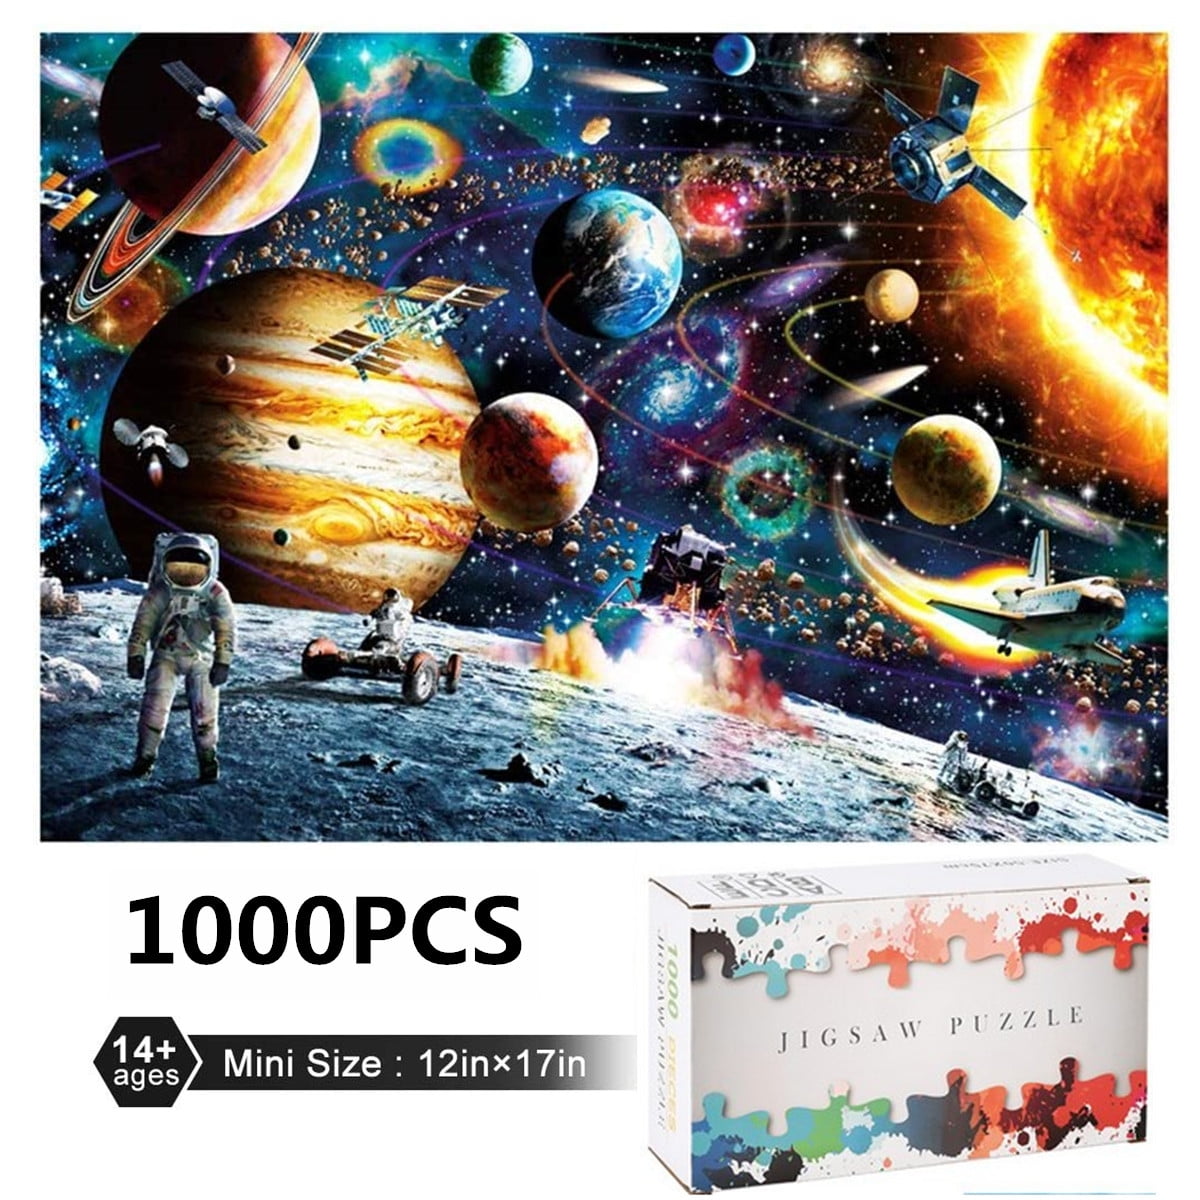 Jigsaw Puzzles for Adults 4000 Piece Puzzle for Adults or Kids,Colorful and Beautiful Pictures Toy Gifts Family Games Home Decoration